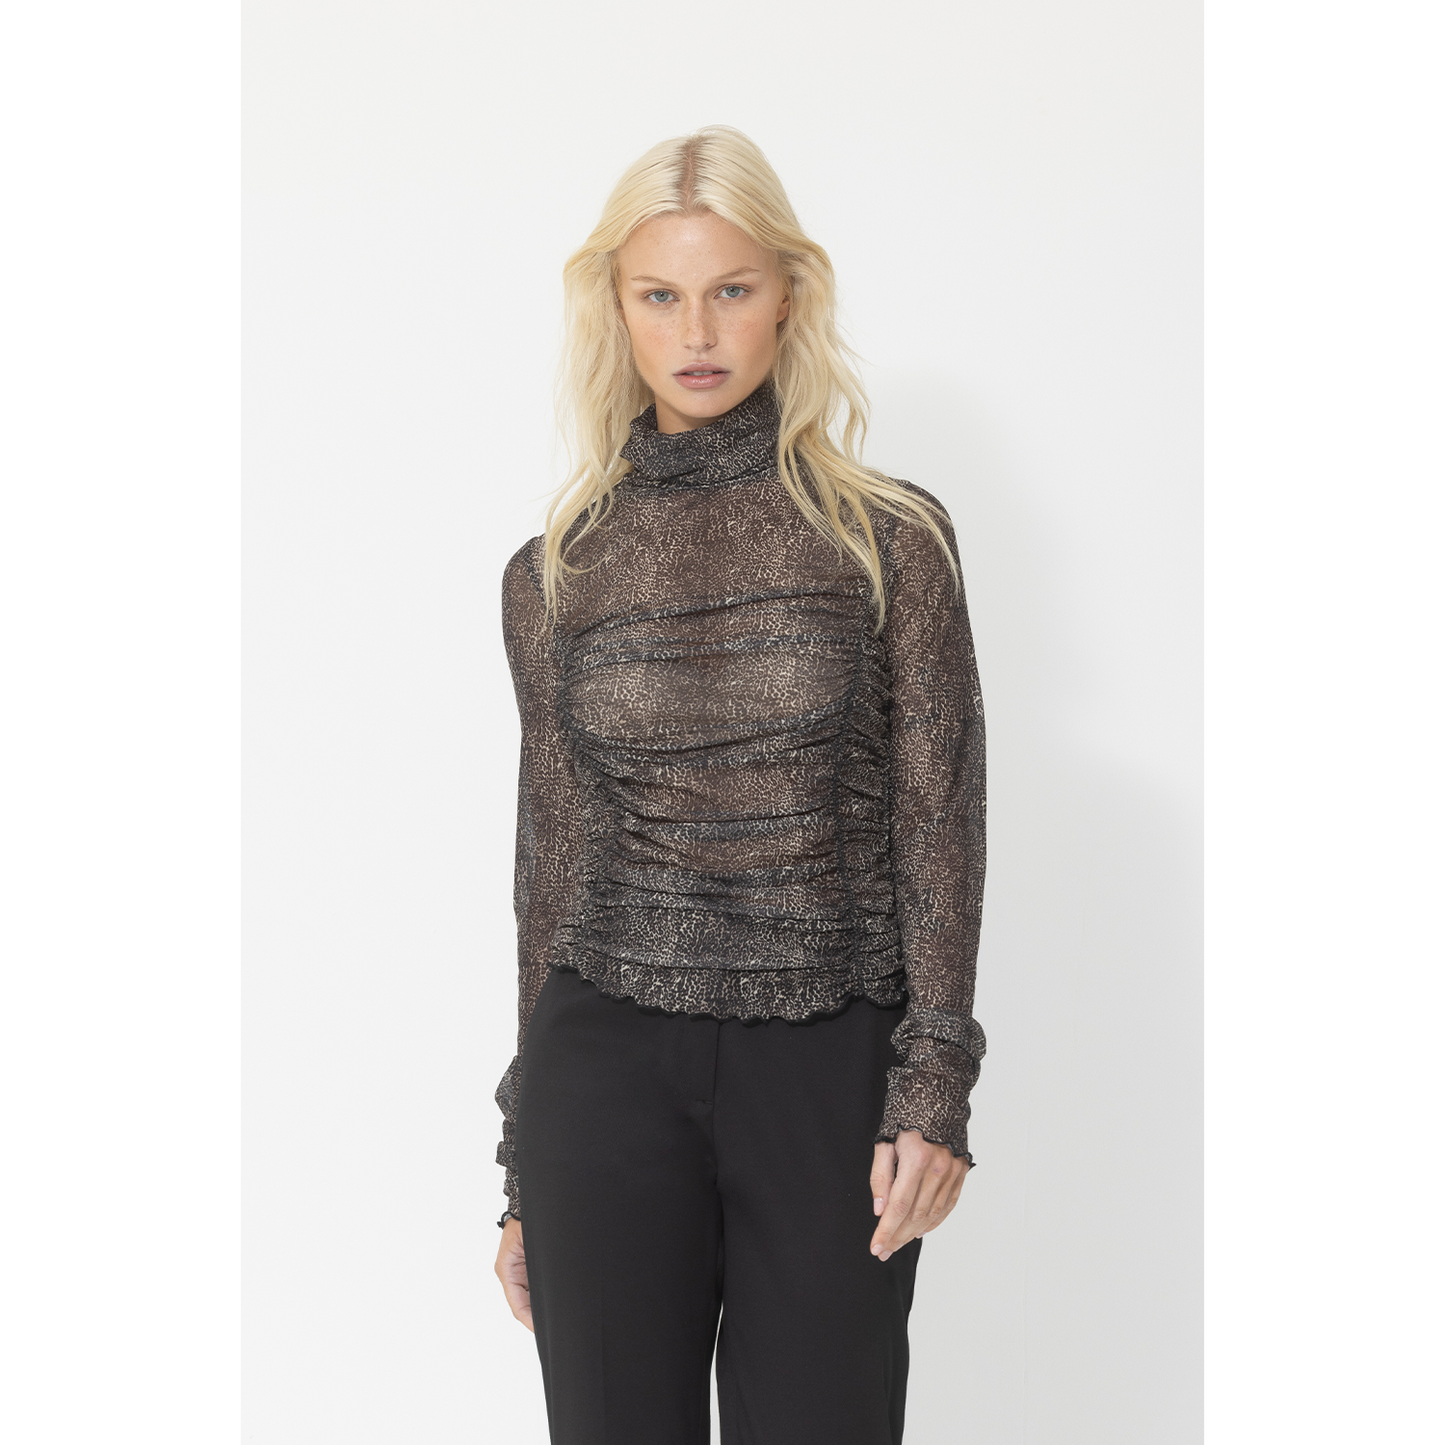 Joey Rouched Top - Baby Leopard Print